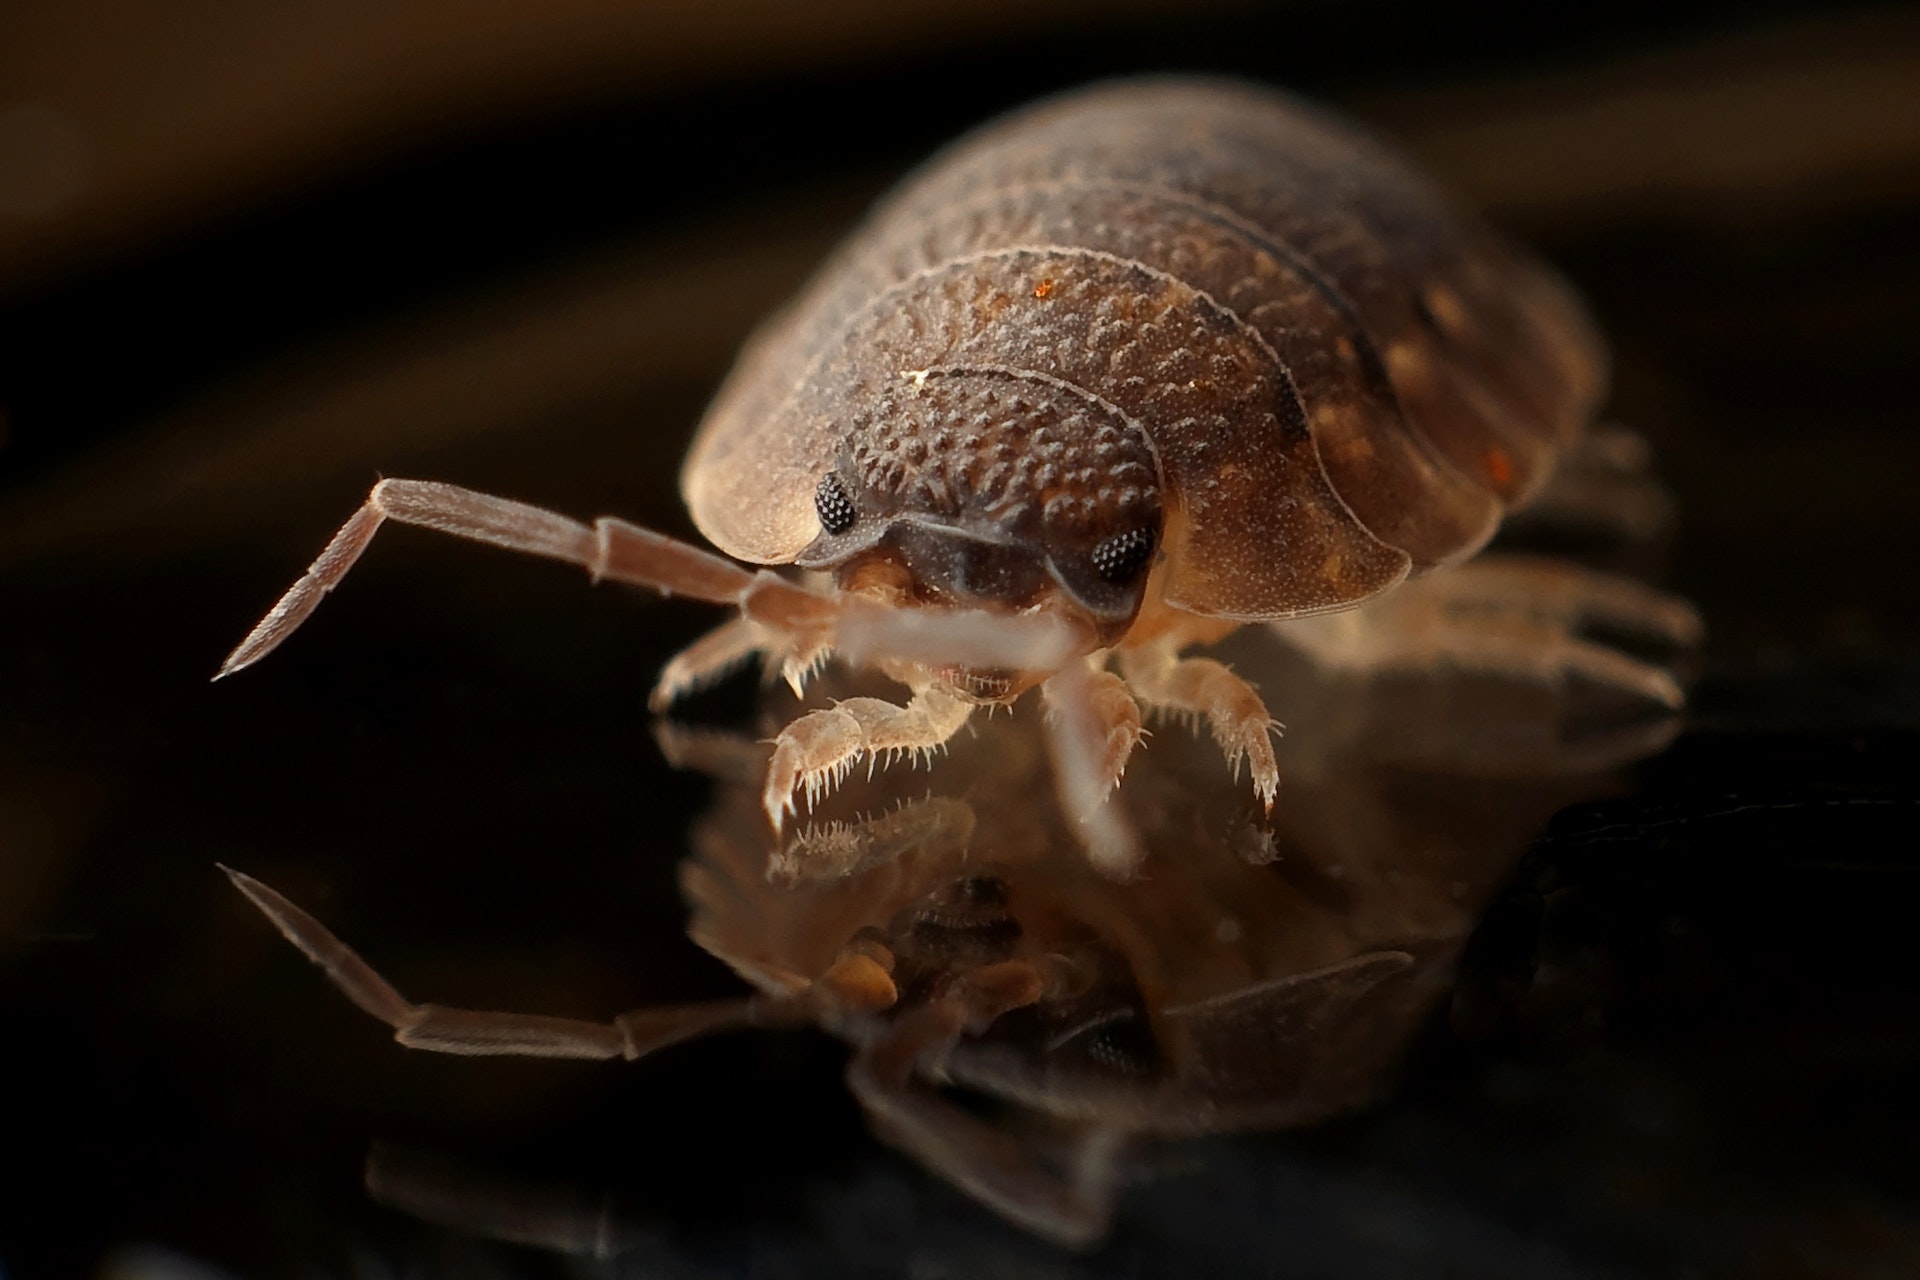 Year-Round Guide To Bed Bugs In Maryland